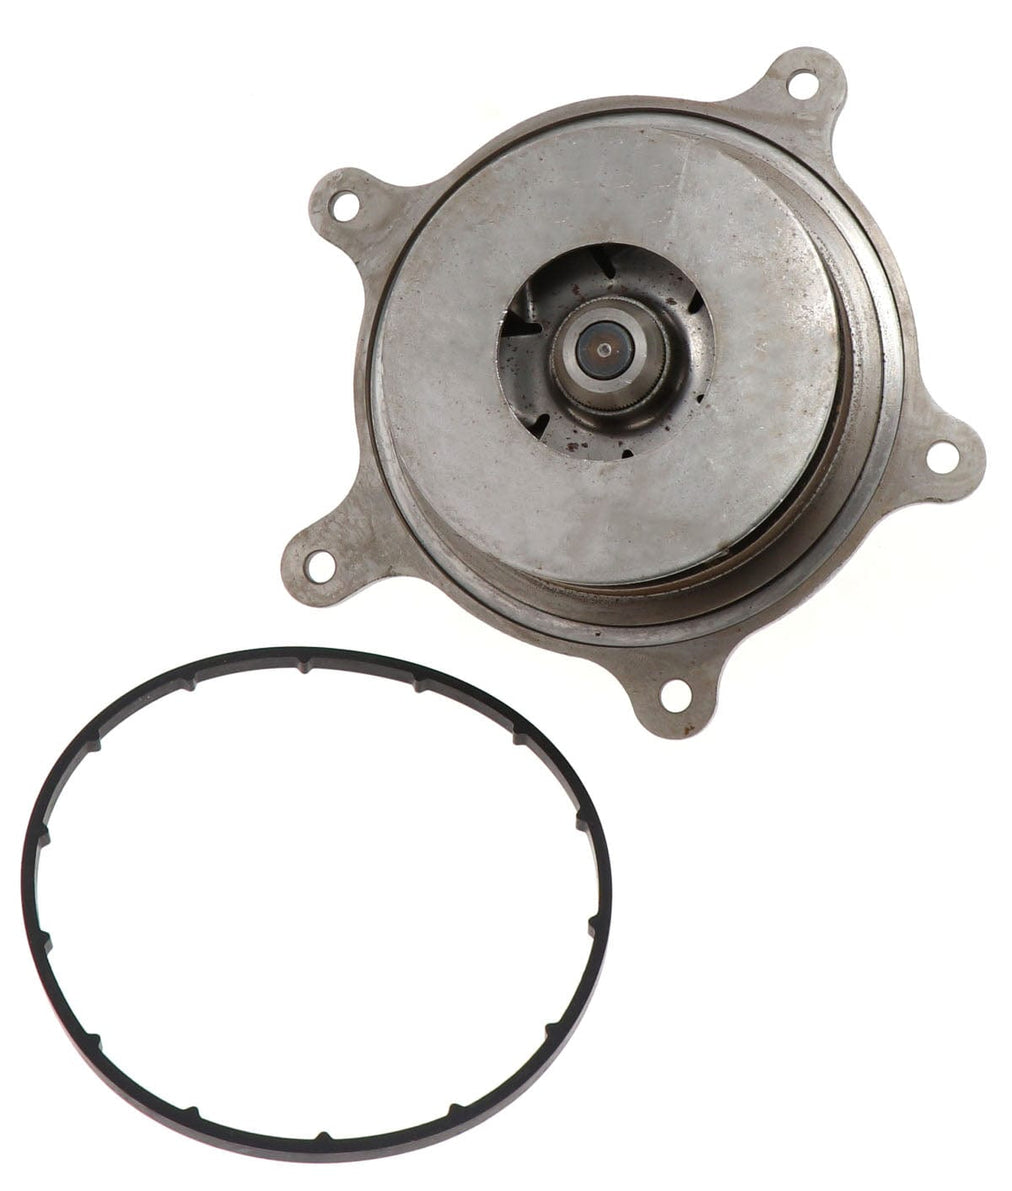 WP-HD3000 | Genuine International® Water Pump Assembly DT466, DT466E